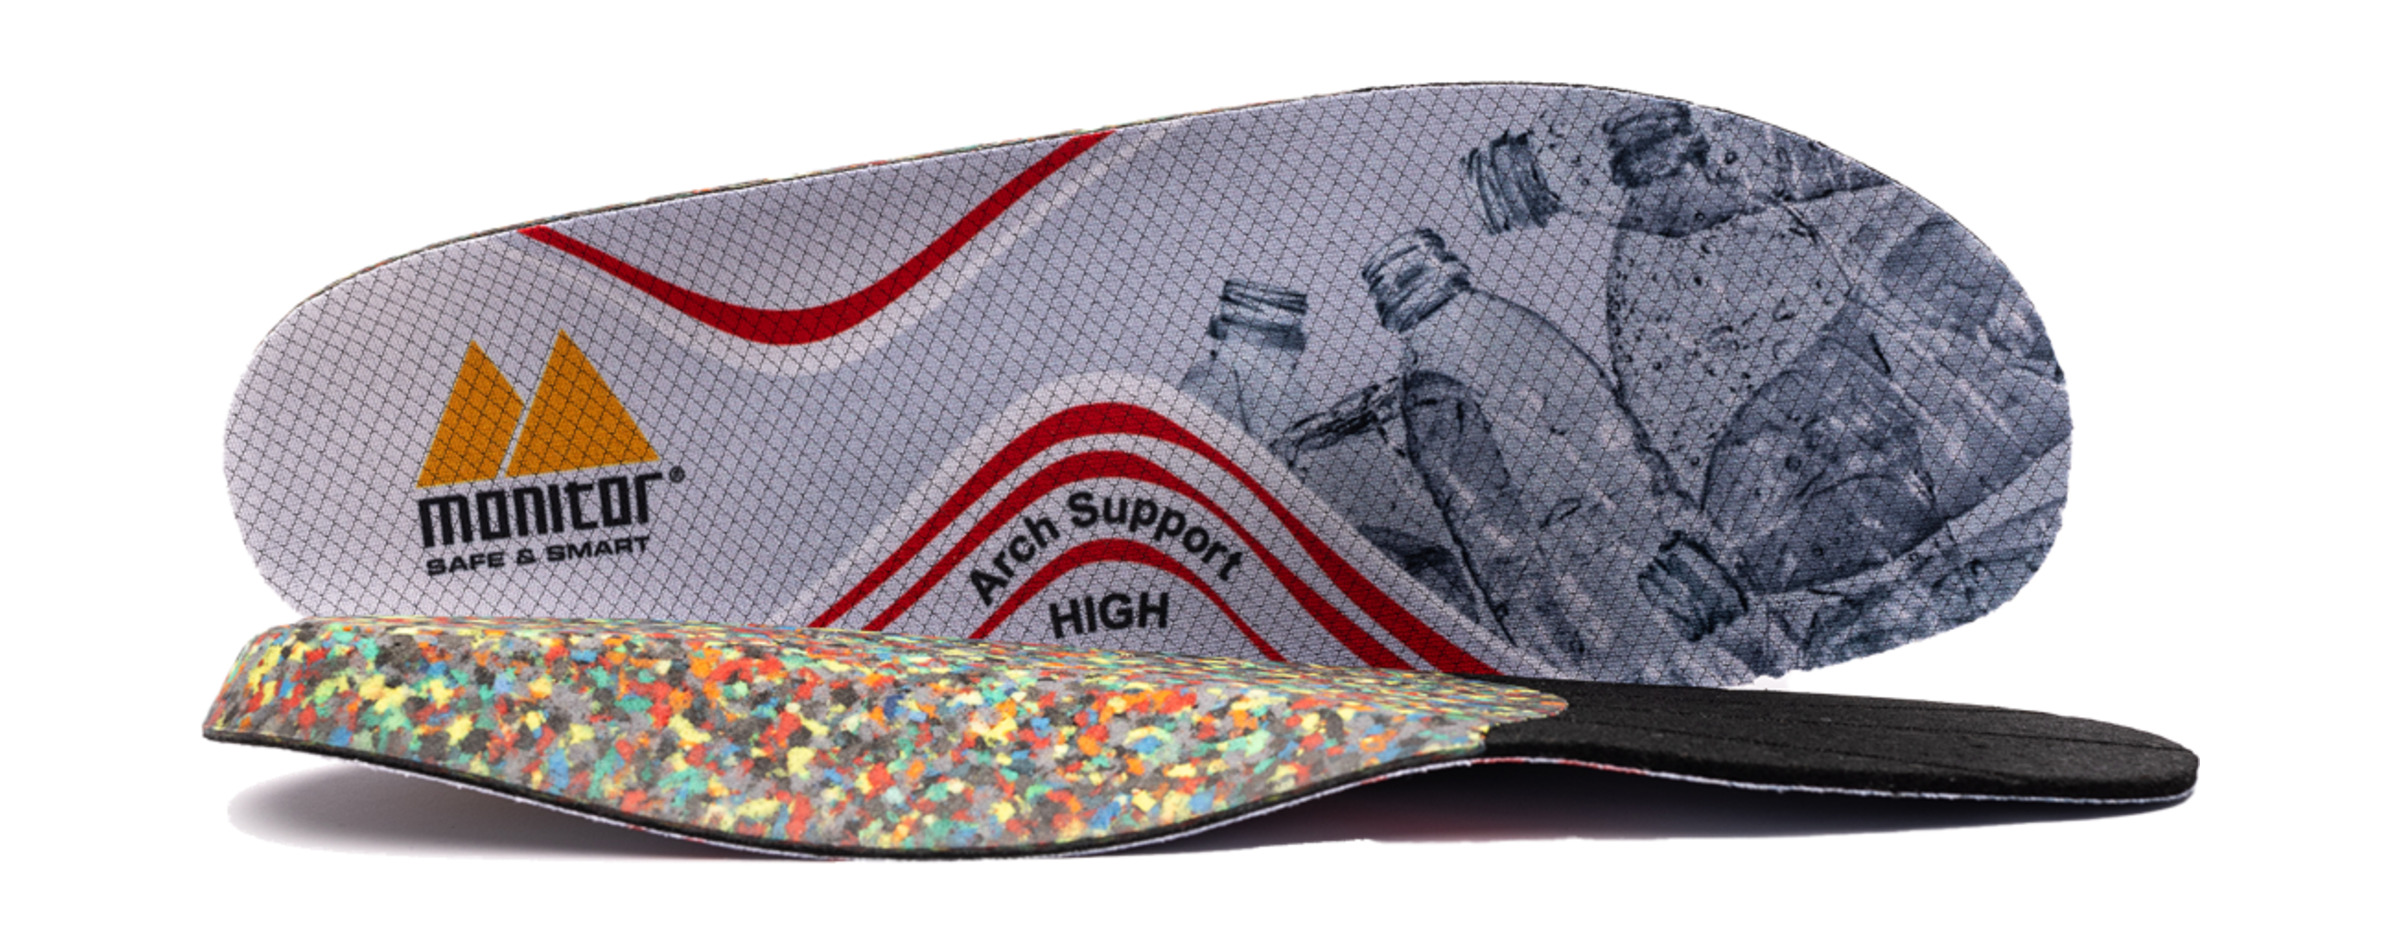 Monitor Arch Support High Insole